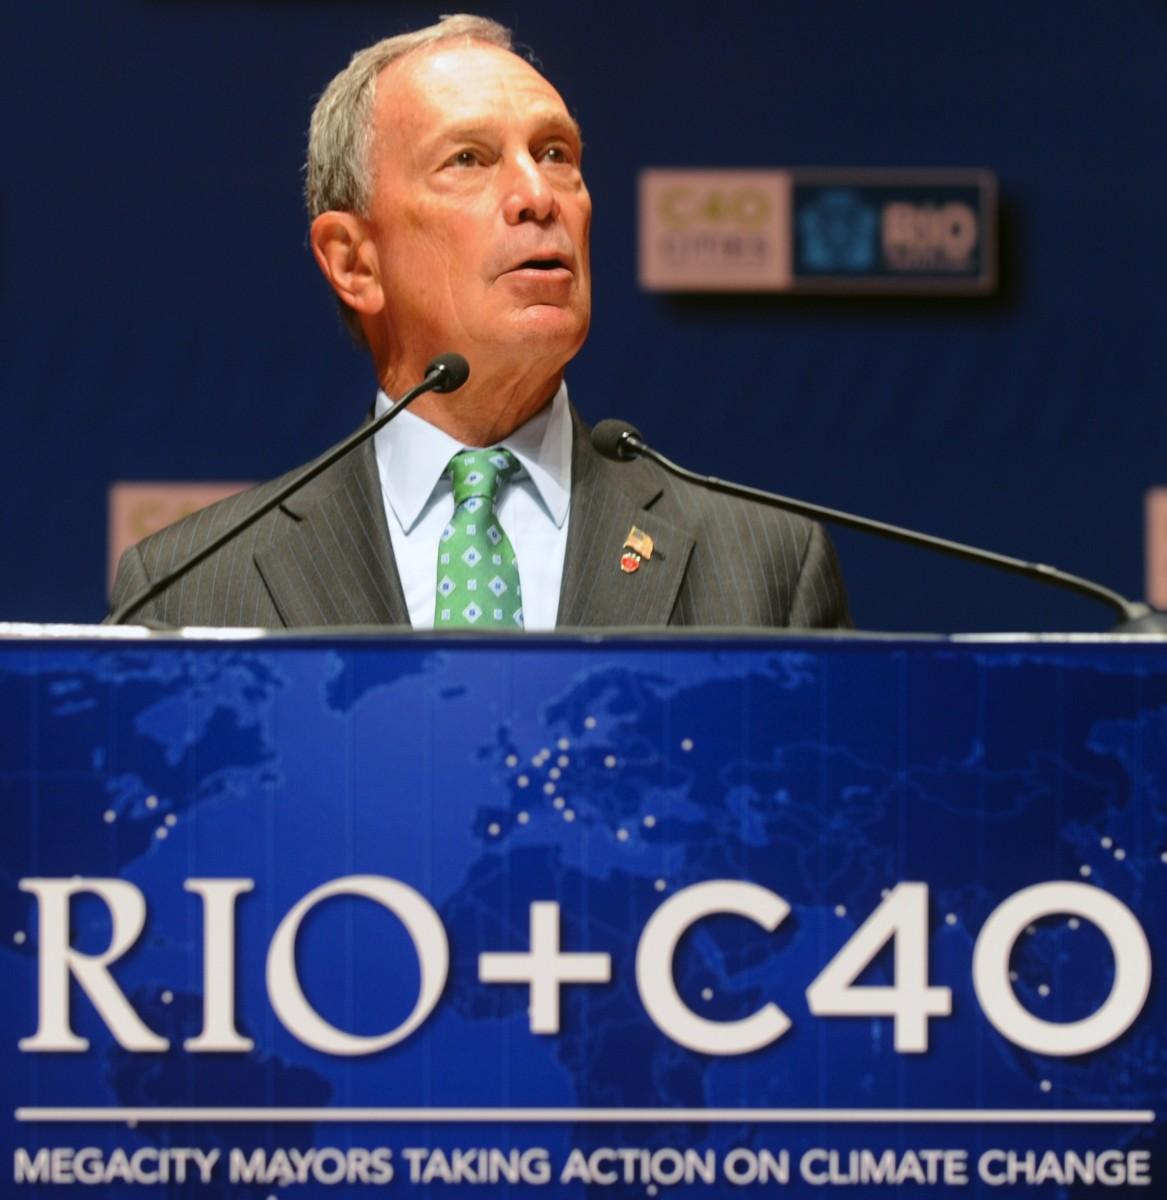 <a><img class="size-large wp-image-1785951" title="New York City Mayor Michael Bloomberg delivers a speech during the Rio+C40 MegaCity Mayors " src="https://www.theepochtimes.com/assets/uploads/2015/09/146552194.jpg" alt="New York City Mayor Michael Bloomberg delivers a speech during the Rio+C40 MegaCity Mayors" width="574" height="590"/></a>